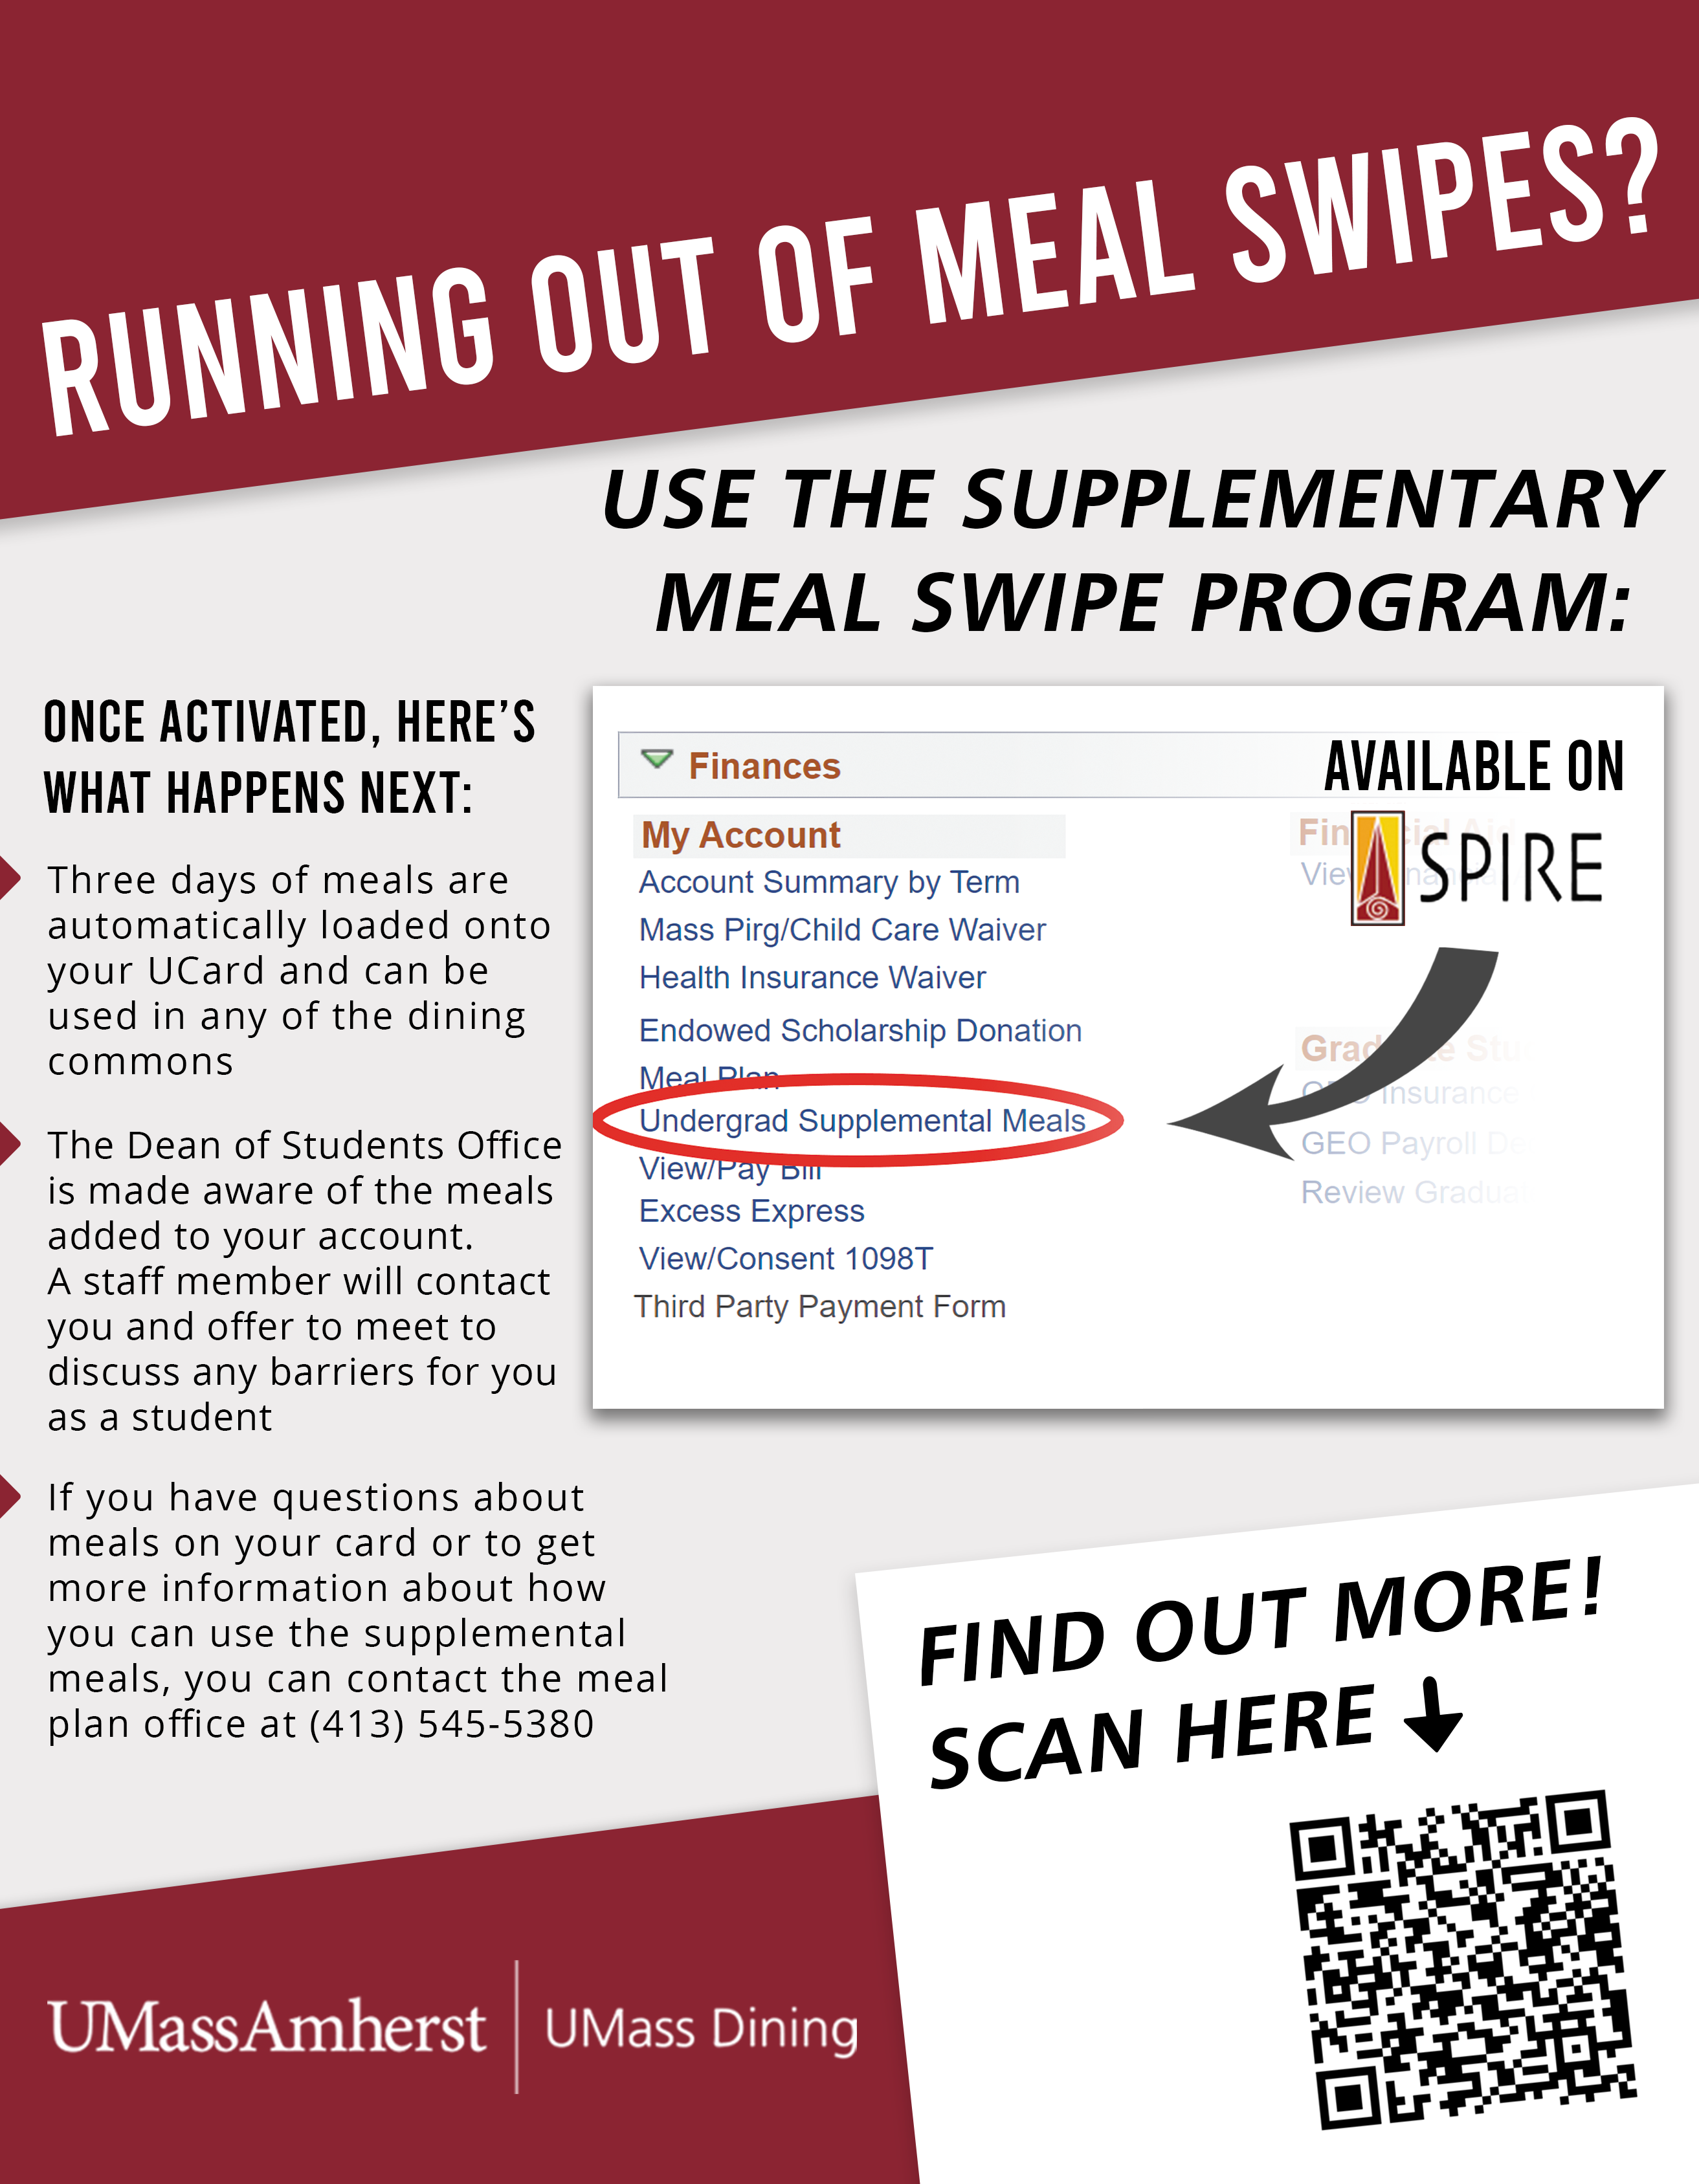 A poster advertising a supplementary meal program